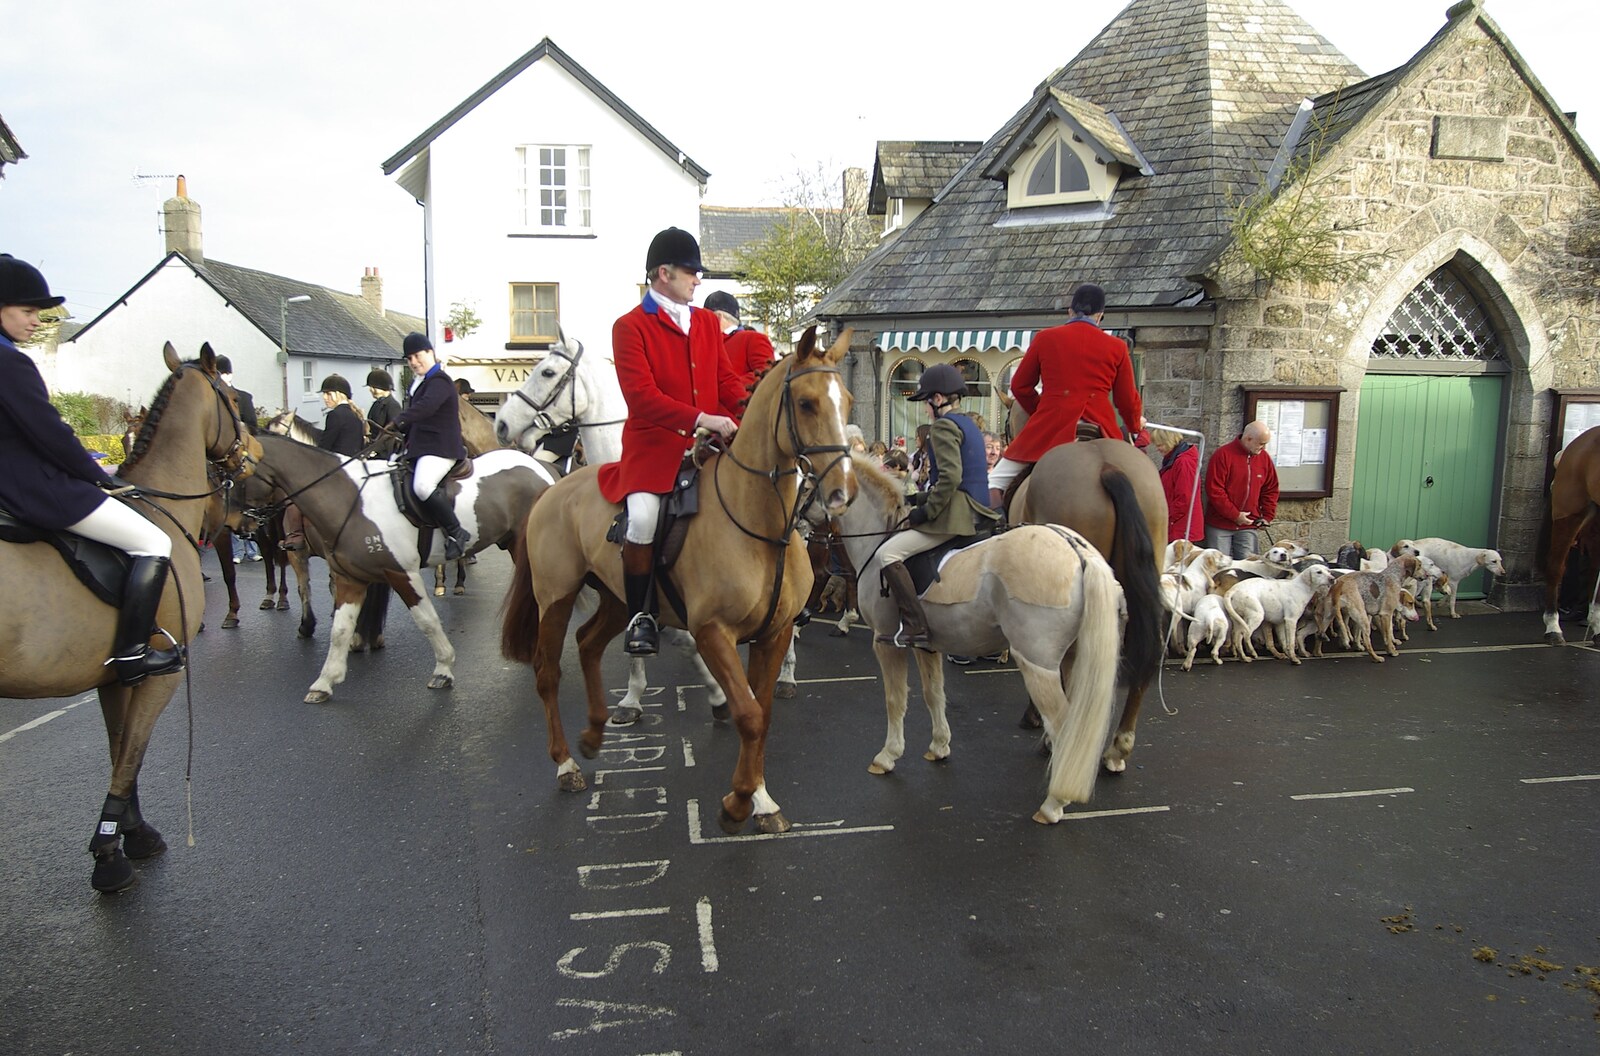 Horses skitter as the hounds howl from A Boxing Day Hunt, Chagford, Devon - 26th December 2007